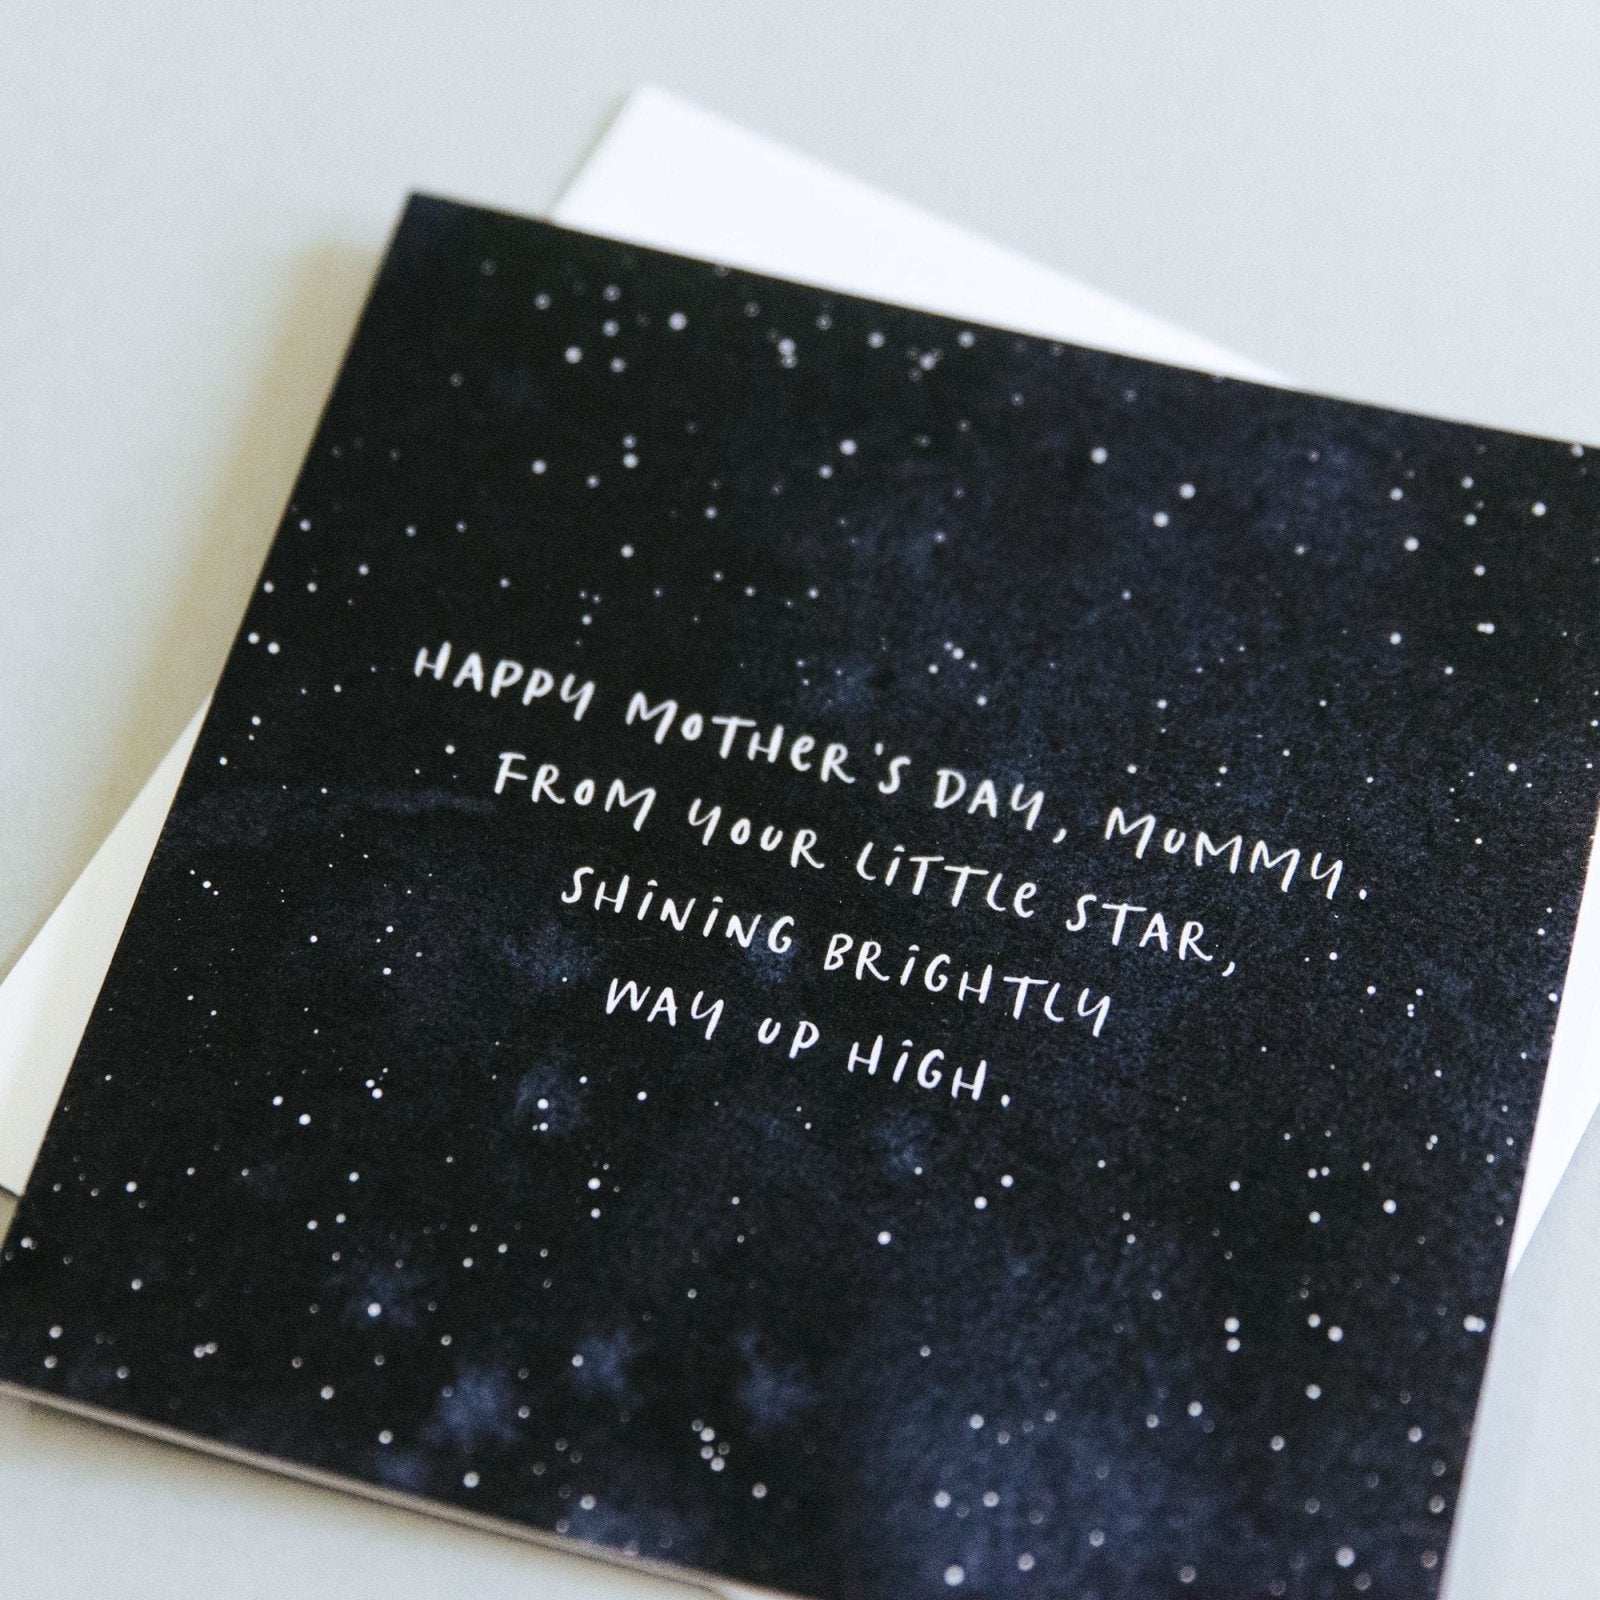 Bereaved Mother's Day Card "From Your Little Star" - I am Nat Ltd - Greeting Card